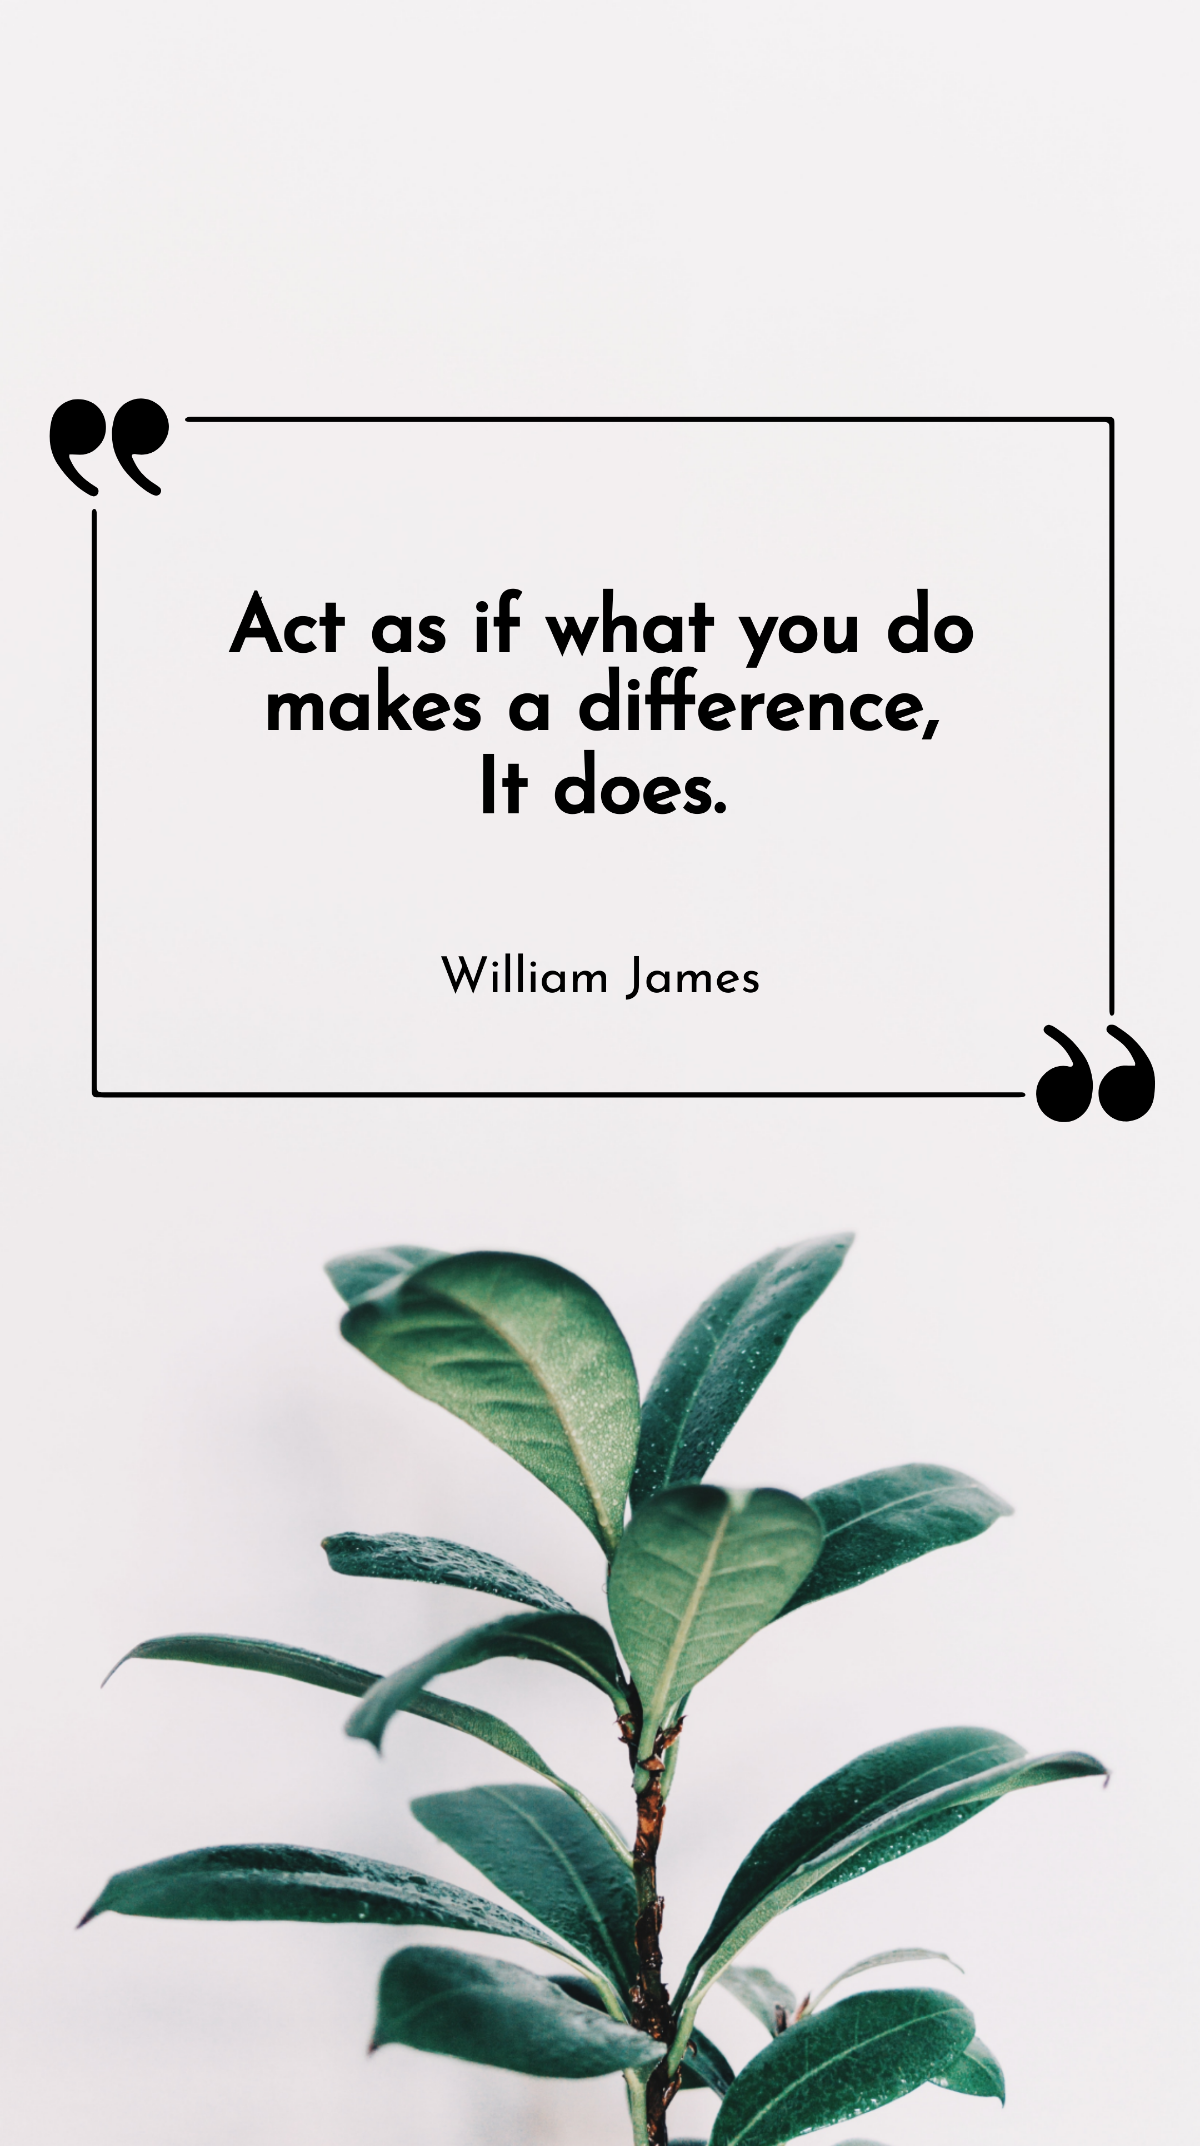 William James - Act as if what you do makes a difference, It does Template